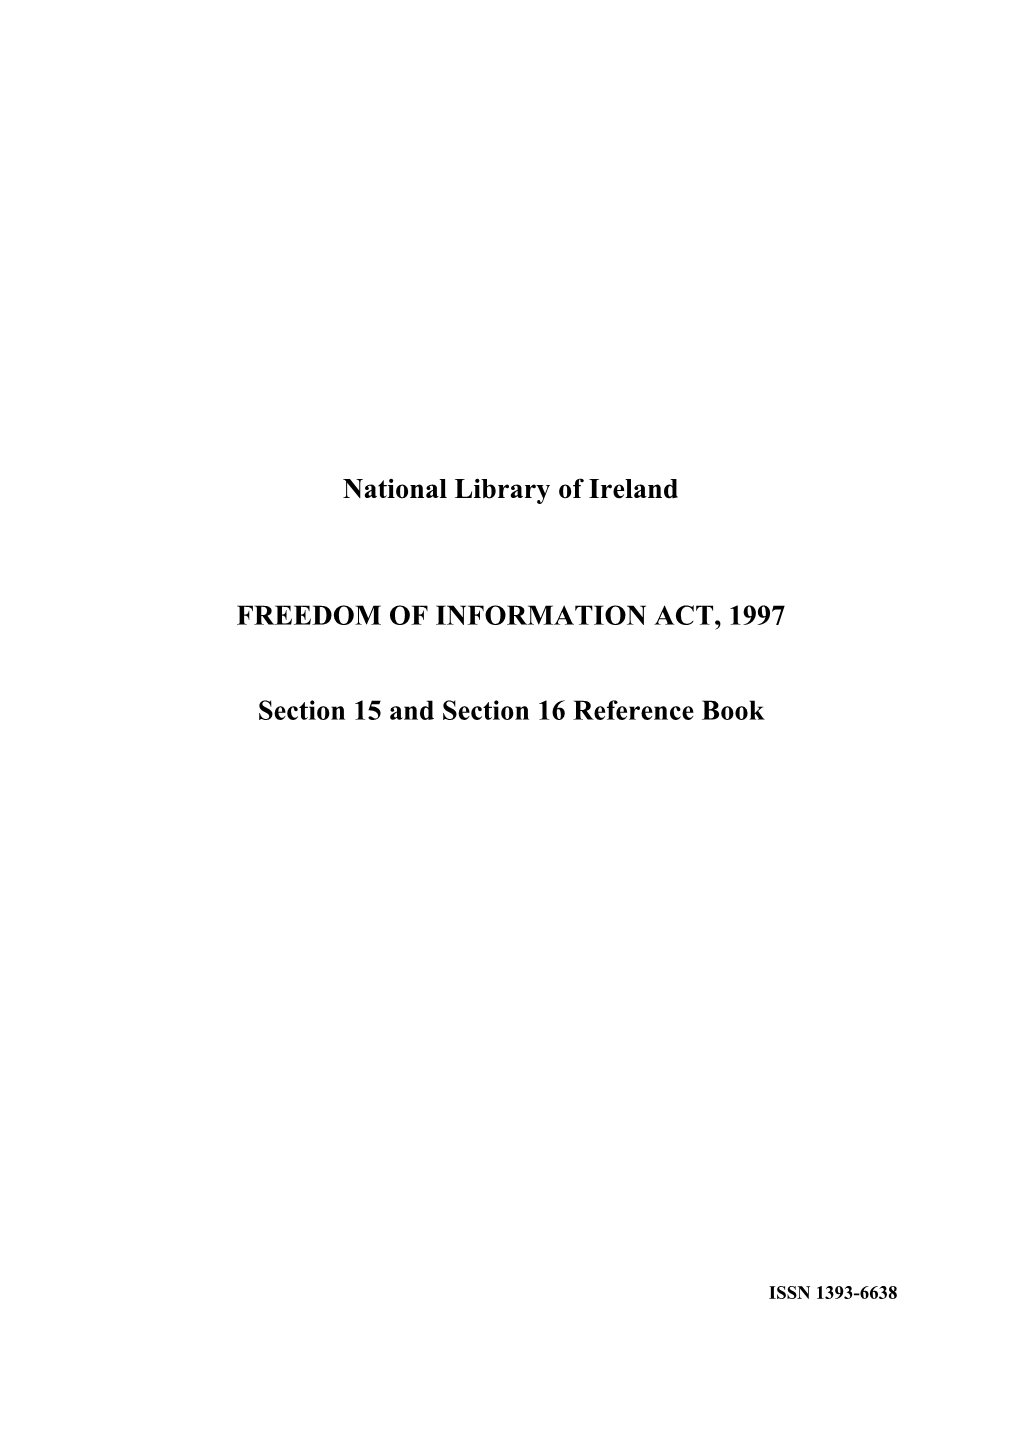 National Library of Ireland FREEDOM of INFORMATION ACT, 1997